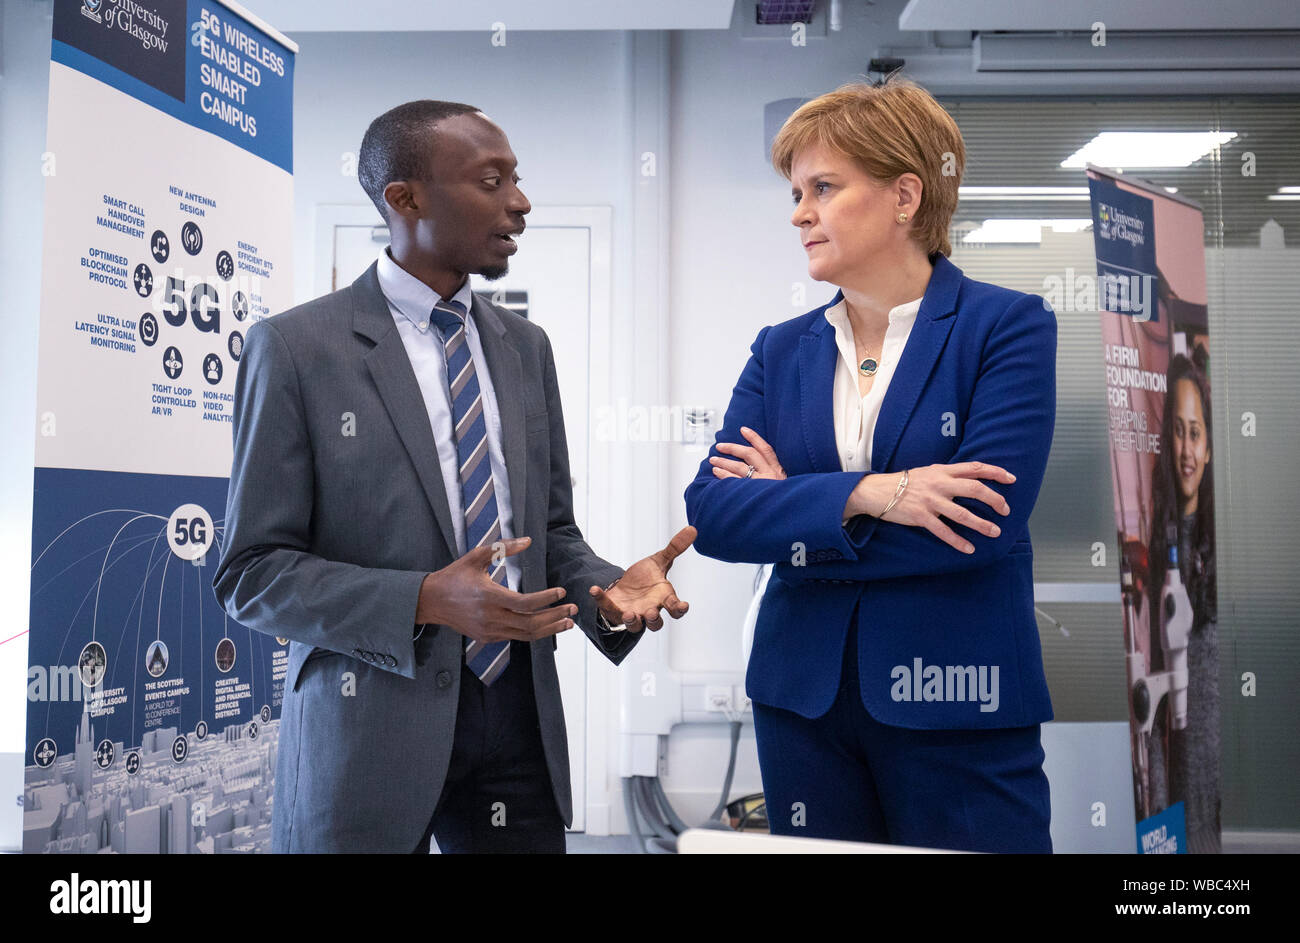 First Minister of Scotland Nicola Sturgeon meets Dr Yusuf Sambo during a visit to the School of Engineering at the University of Glasgow, where the Scottish Government unveiled a new 5G plan. Stock Photo